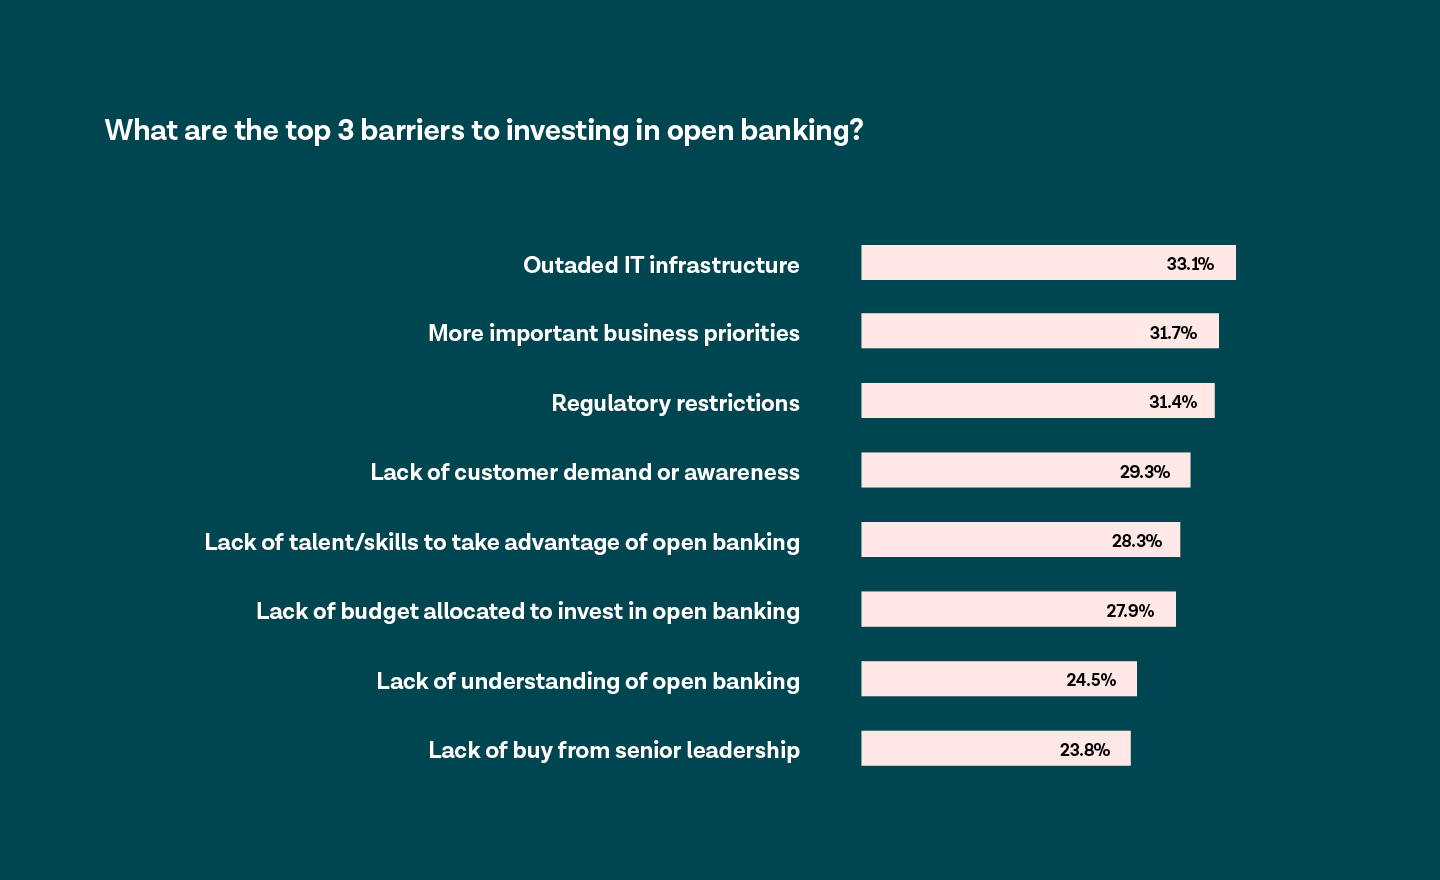 The top 3 barriers to investing in open banking